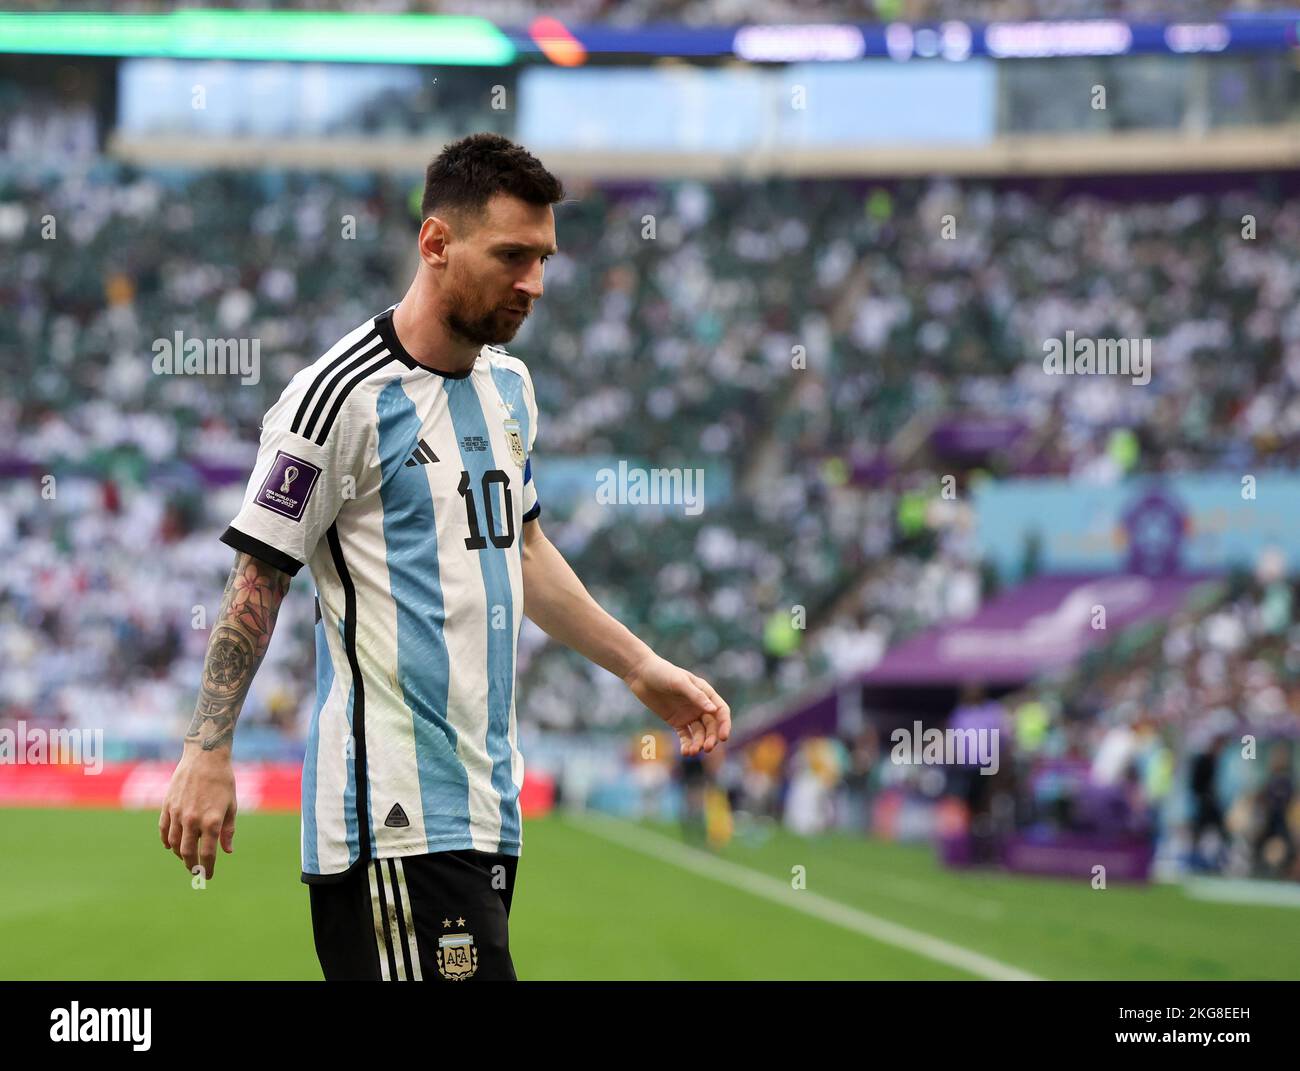 Lusail, Qatar. 22nd Nov, 2022. Lionel Messi of Argentina reacts during the Group C match between Argentina and Saudi Arabia at the 2022 FIFA World Cup at Lusail Stadium in Lusail, Qatar, Nov. 22, 2022. Credit: Cao Can/Xinhua/Alamy Live News Stock Photo